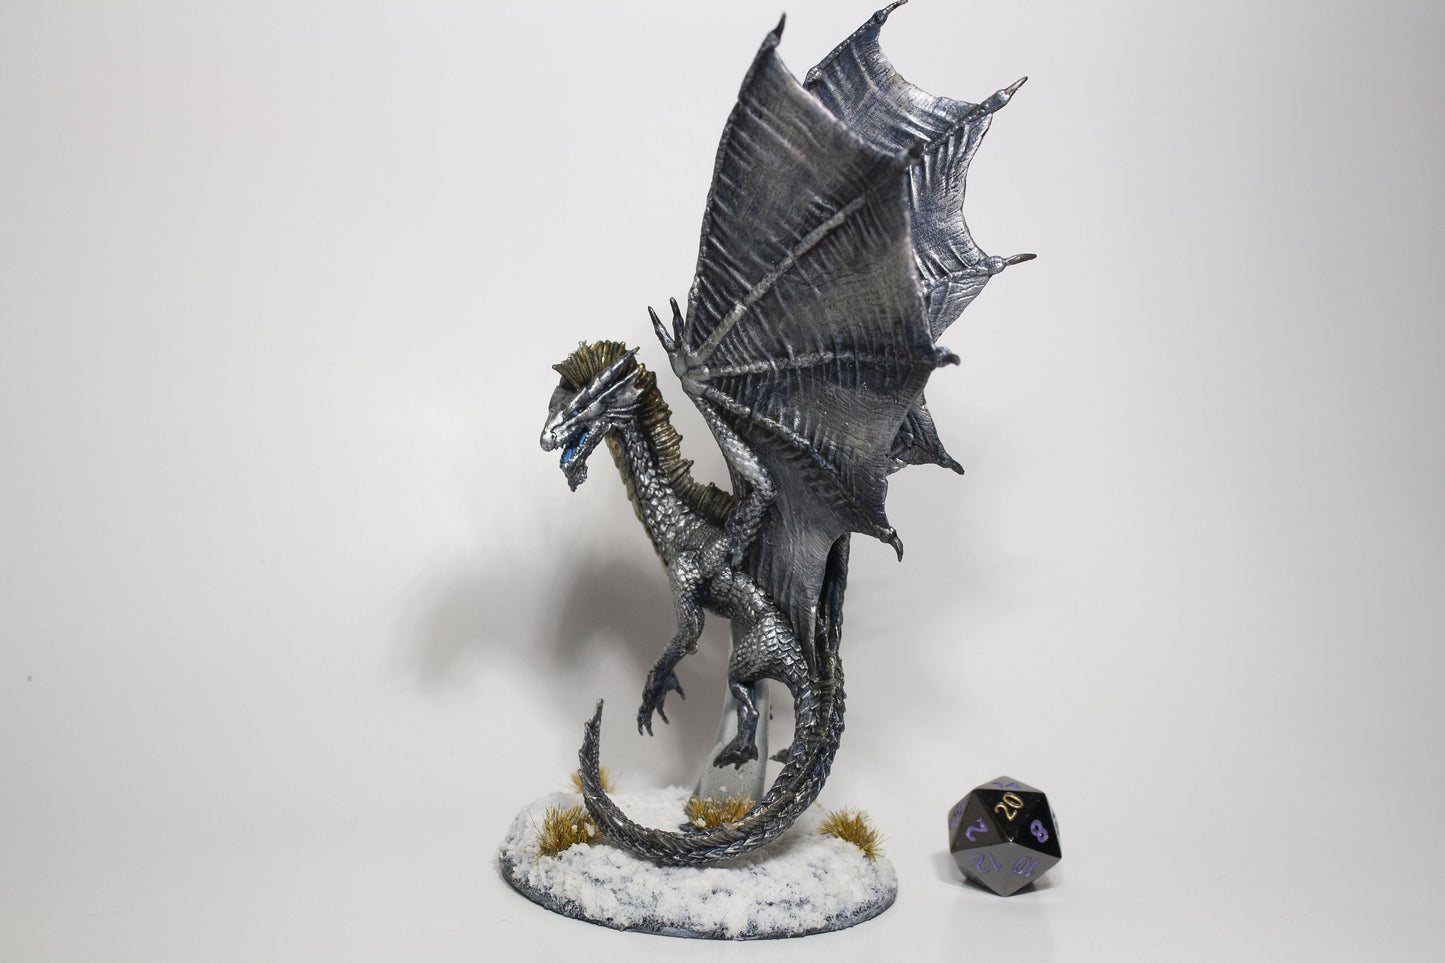 Young Silver Dragon - Paint on Demand! // Custom Painted D&D Mini